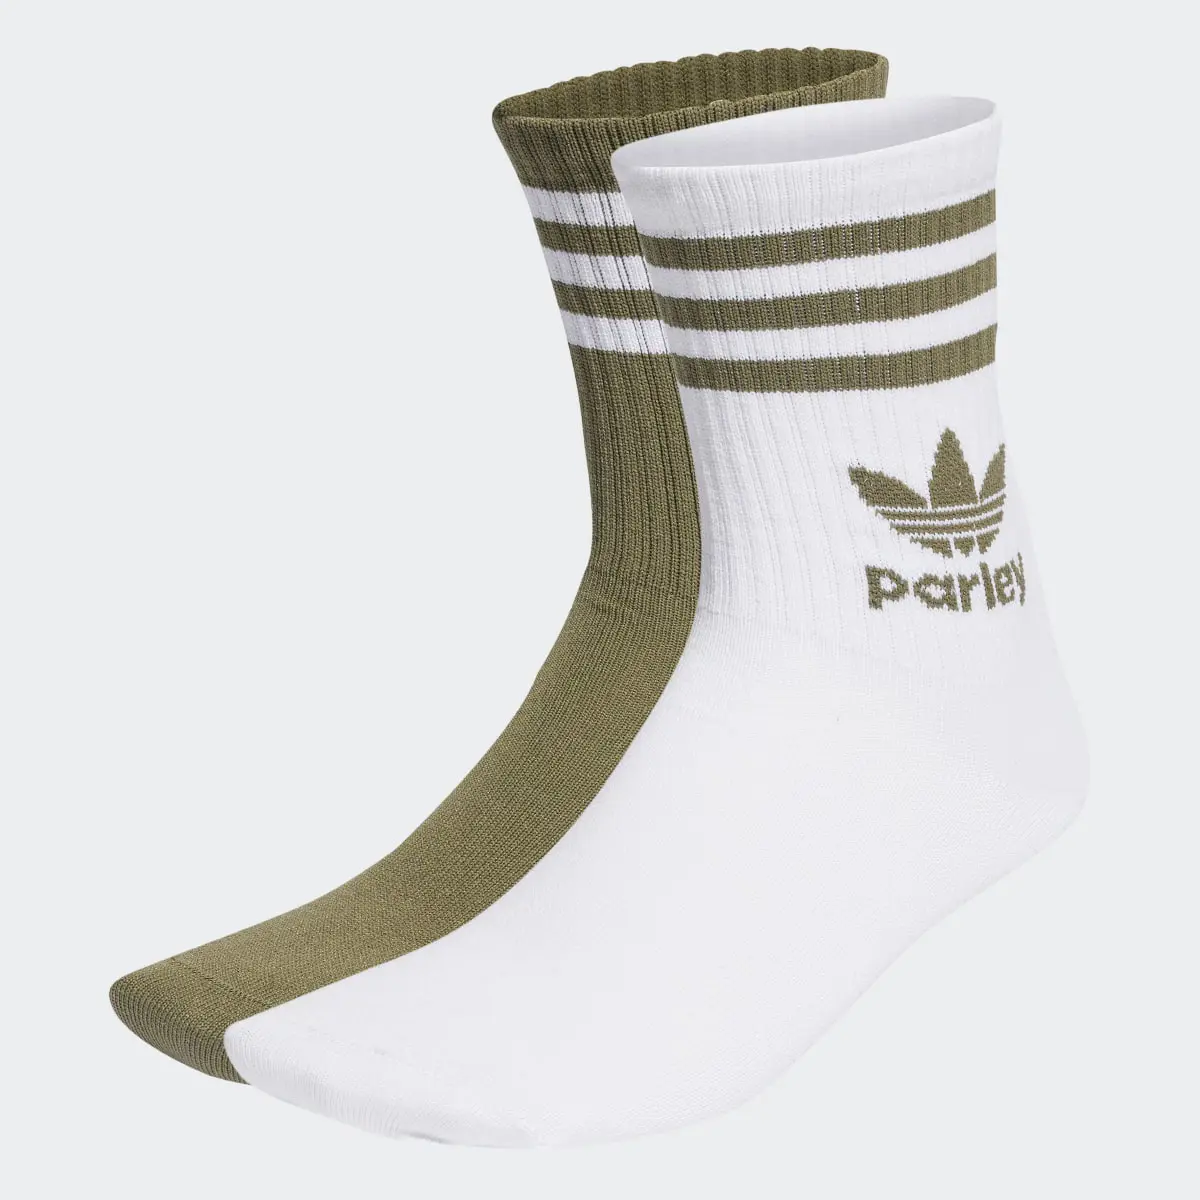 Adidas Chaussettes mi-mollet Parley (2 paires). 1